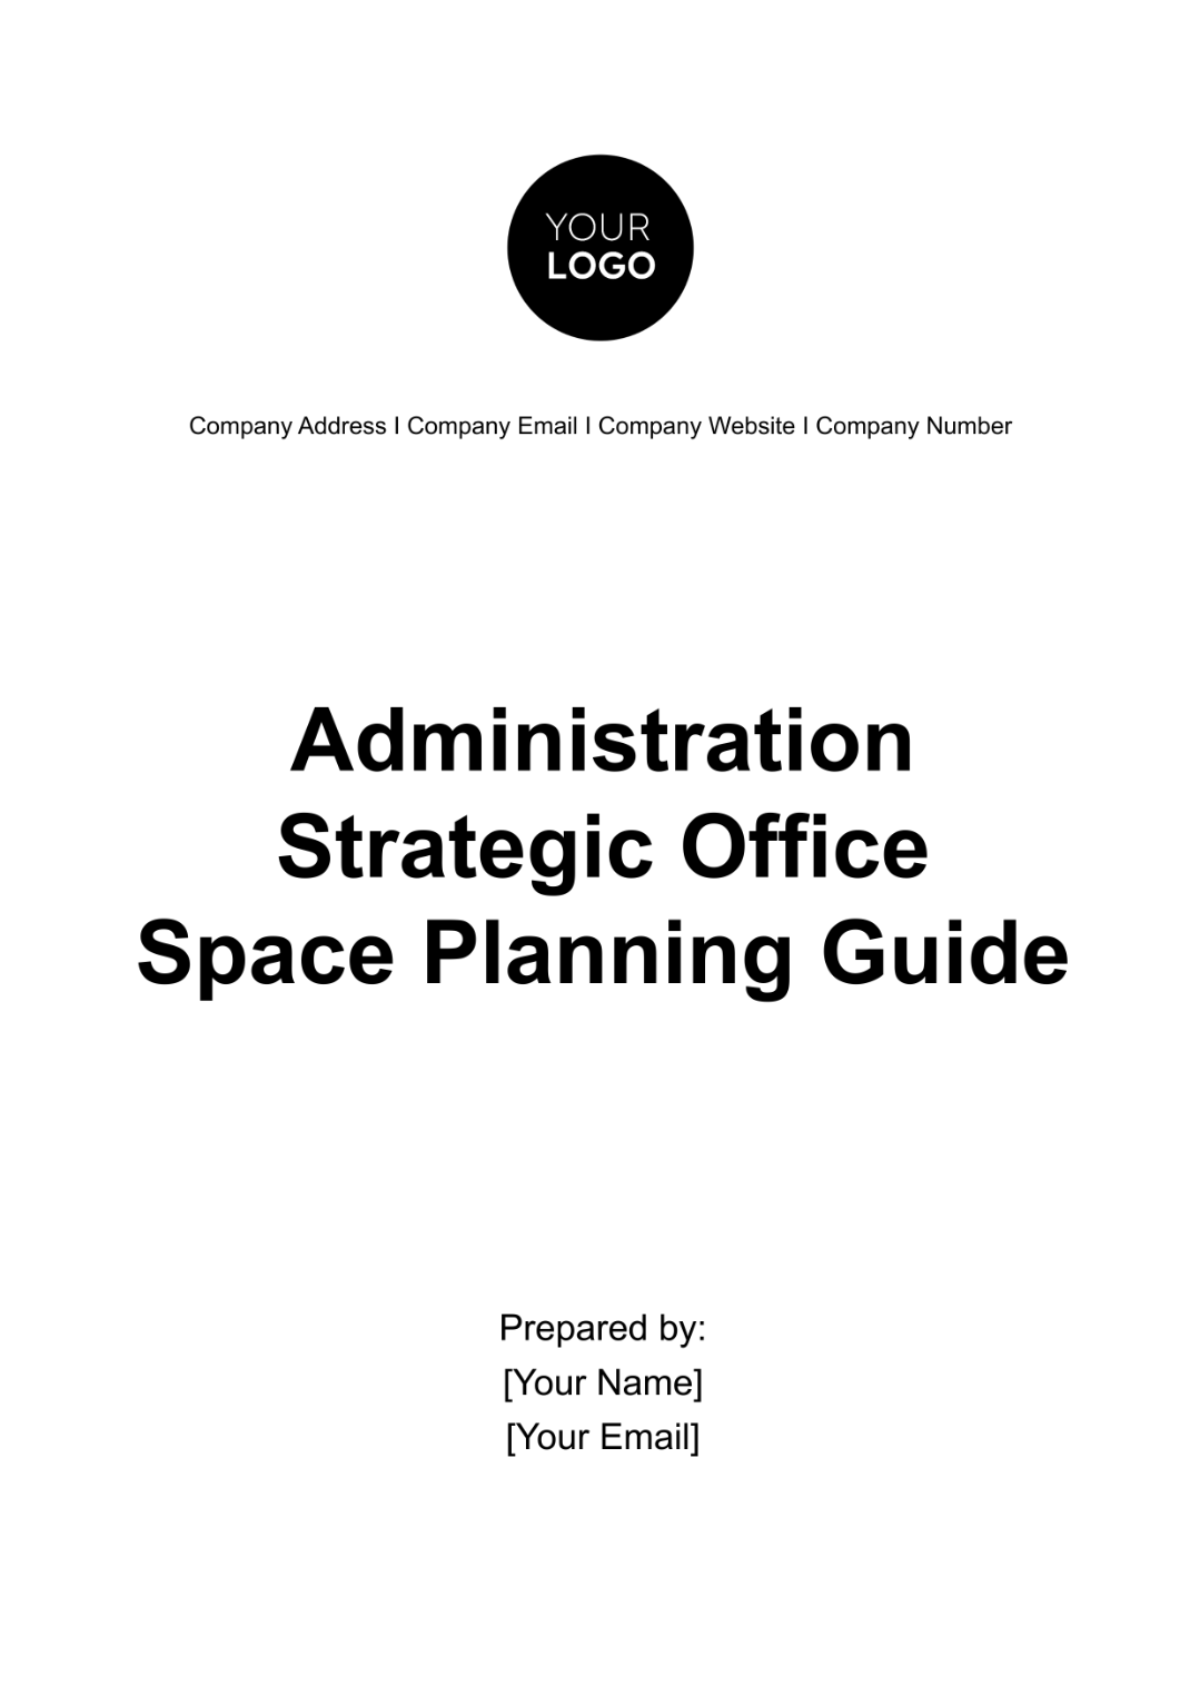 Administration Strategic Office Space Planning Guide Template